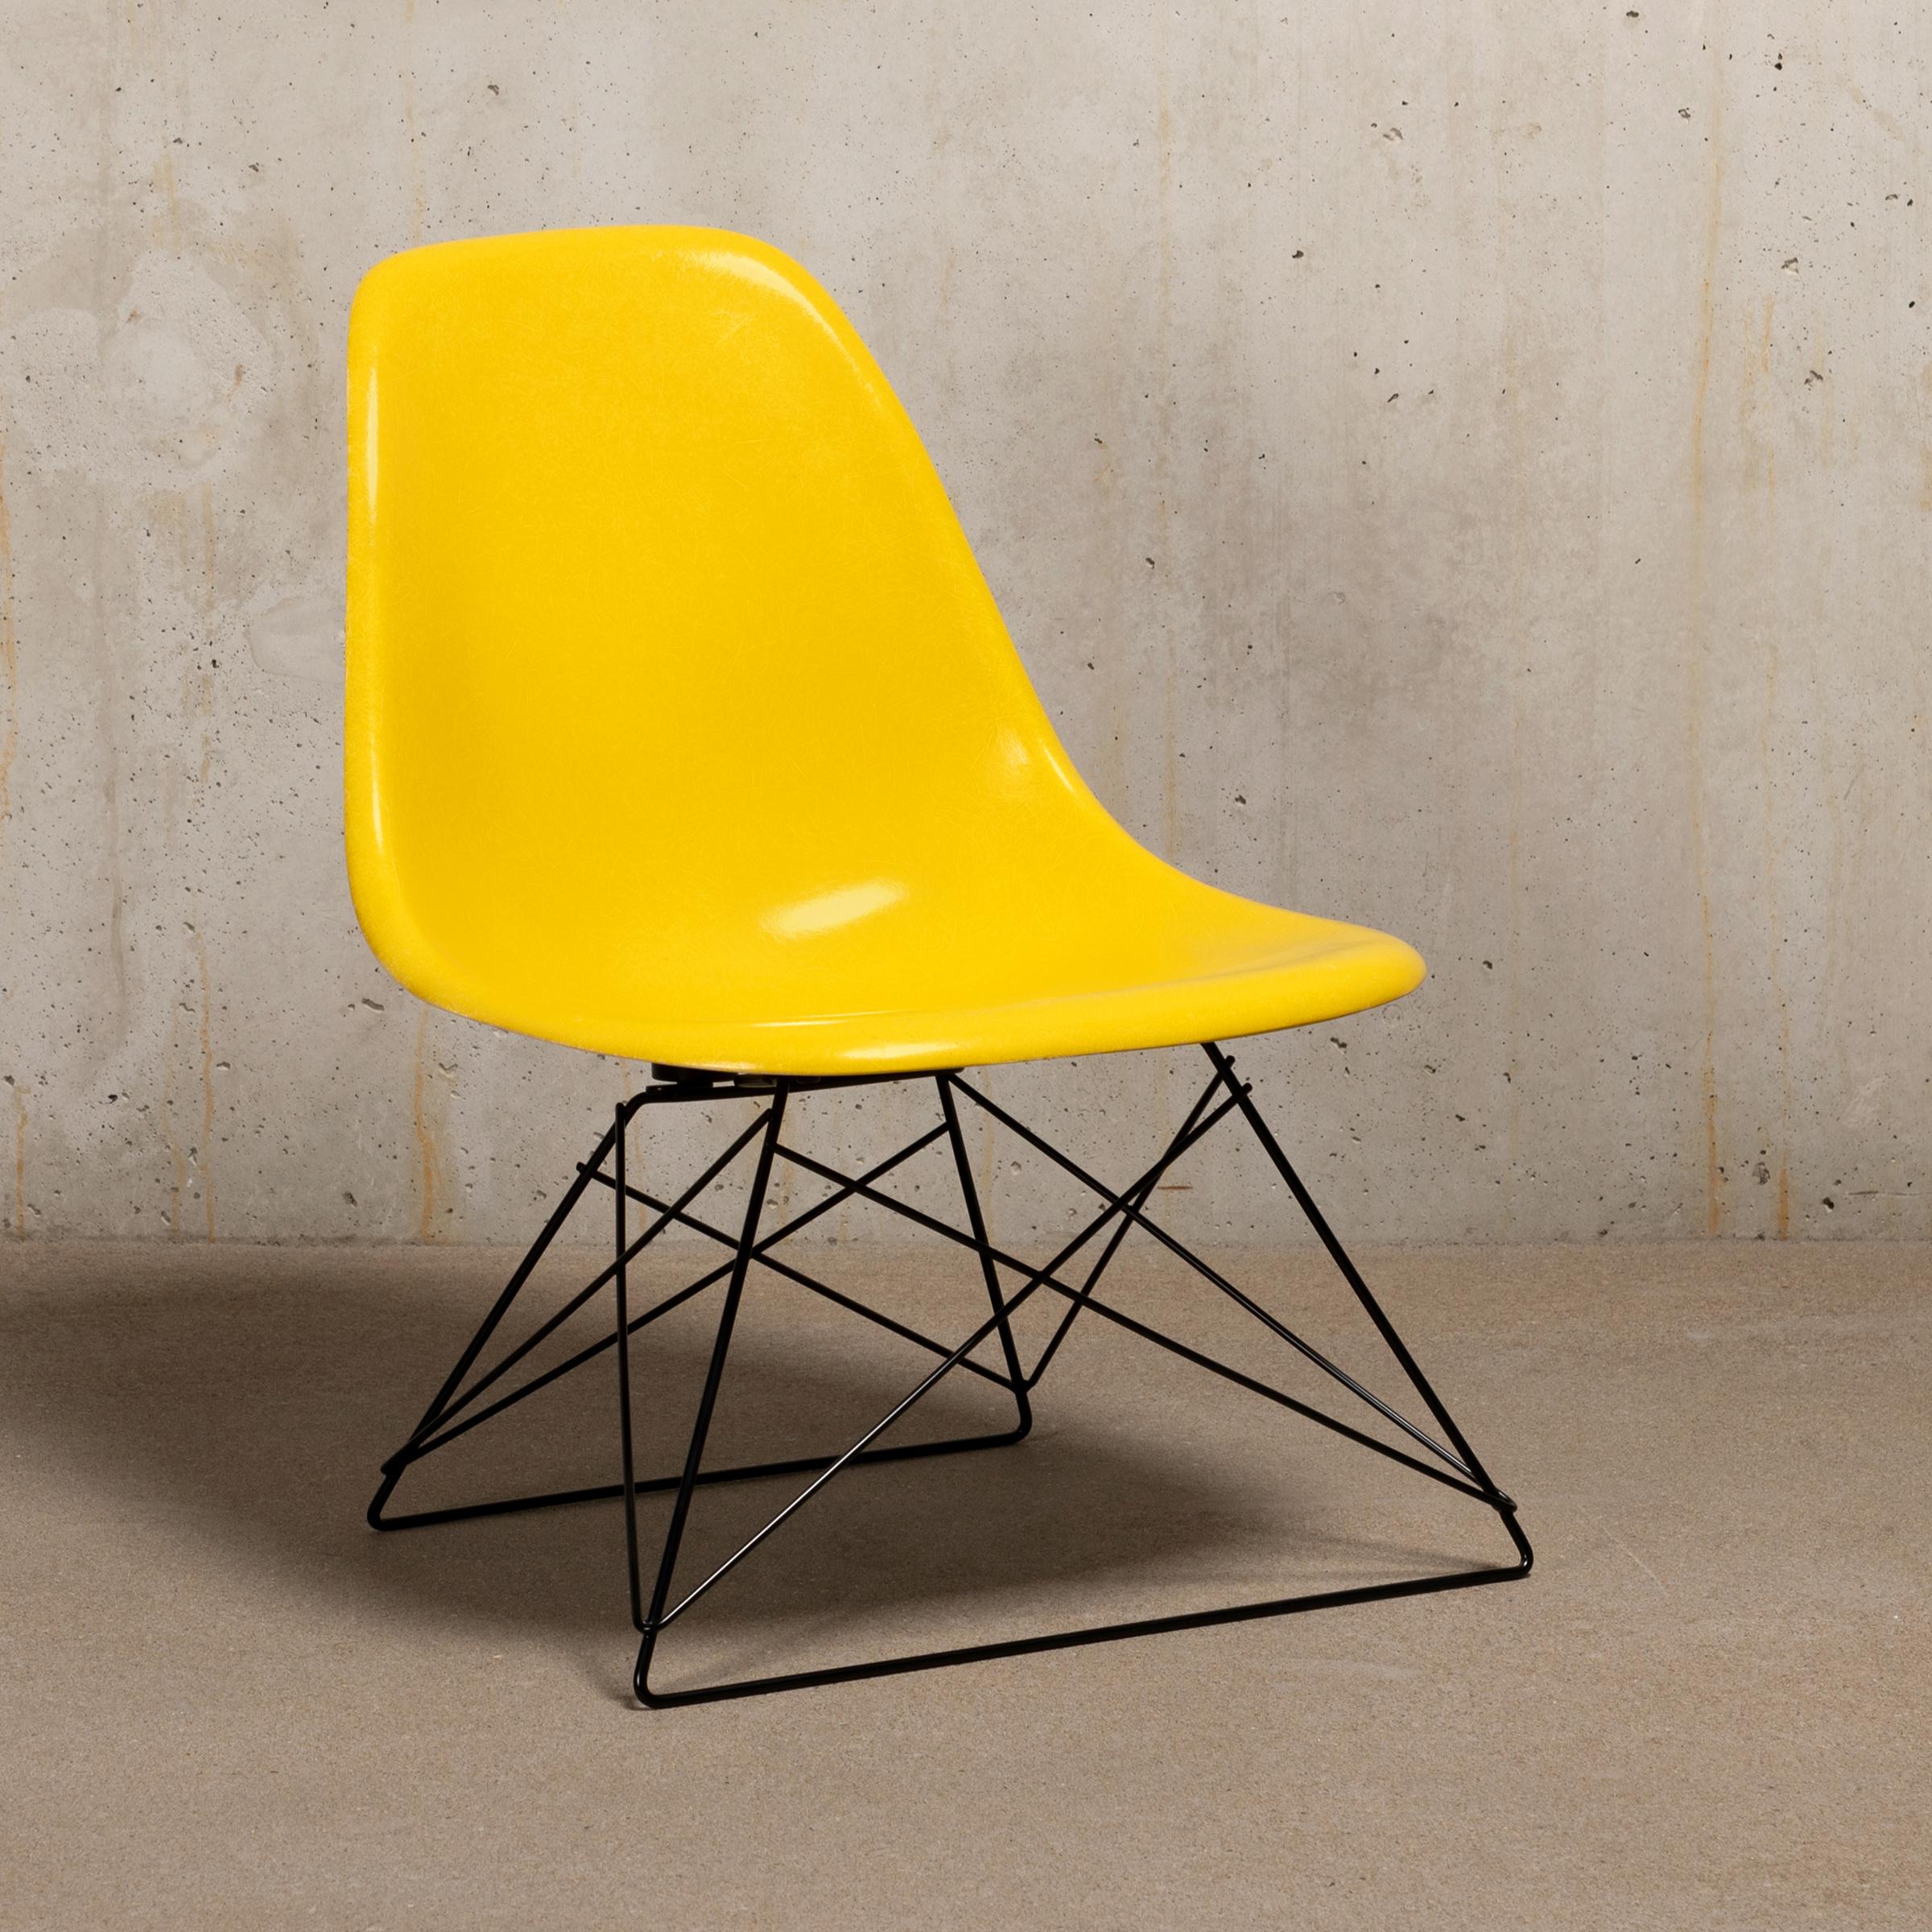 Molded Charles & Ray Eames LSR Lounge Chair in Bright Yellow for Herman Miller